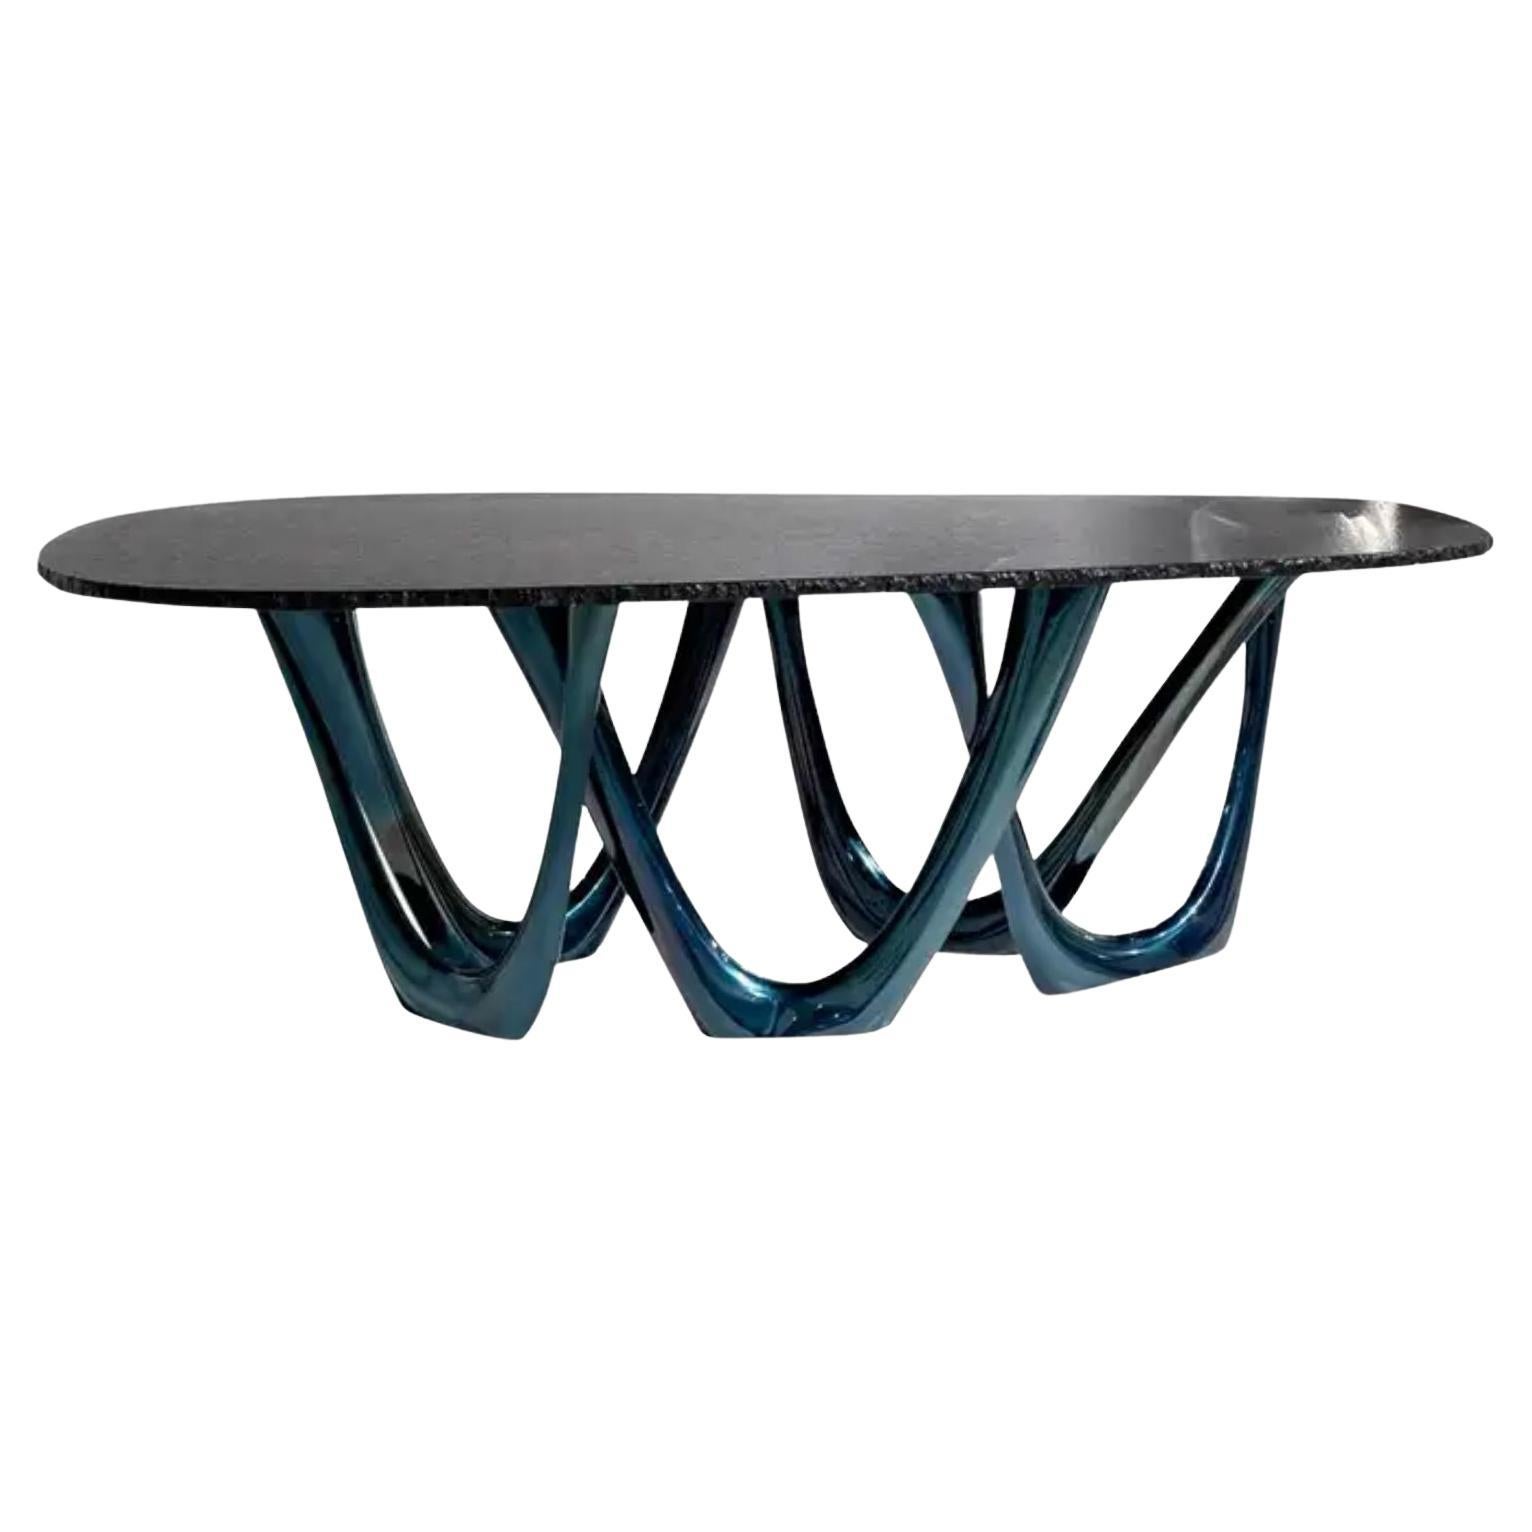 Cosmic Blue Cosmos Granite Sculptural G-Table by Zieta For Sale